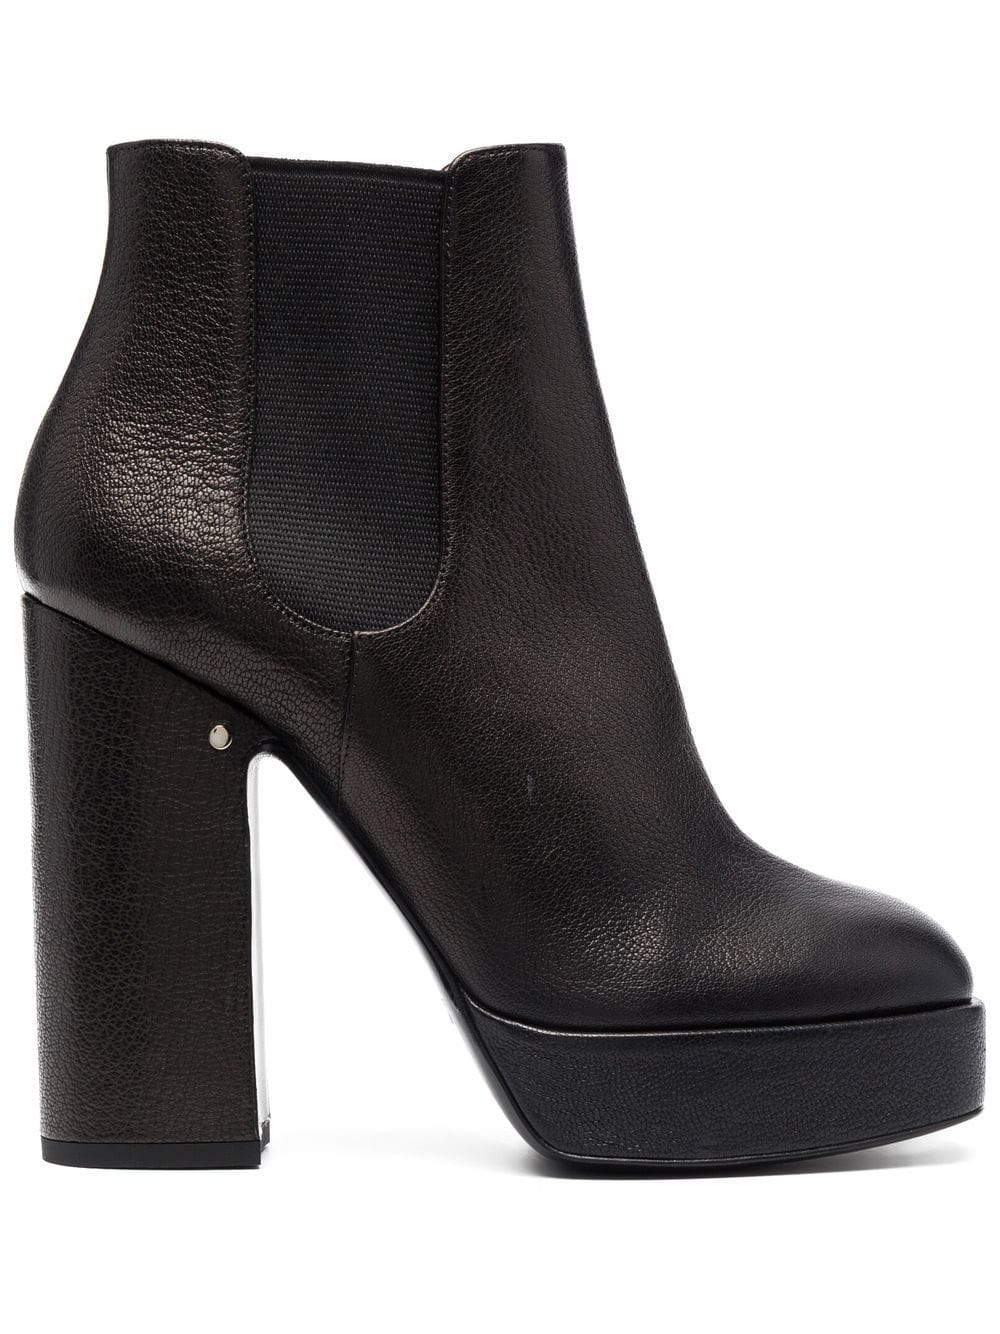 Laurence Dacade Rosa leather ankle boots - Black von Laurence Dacade